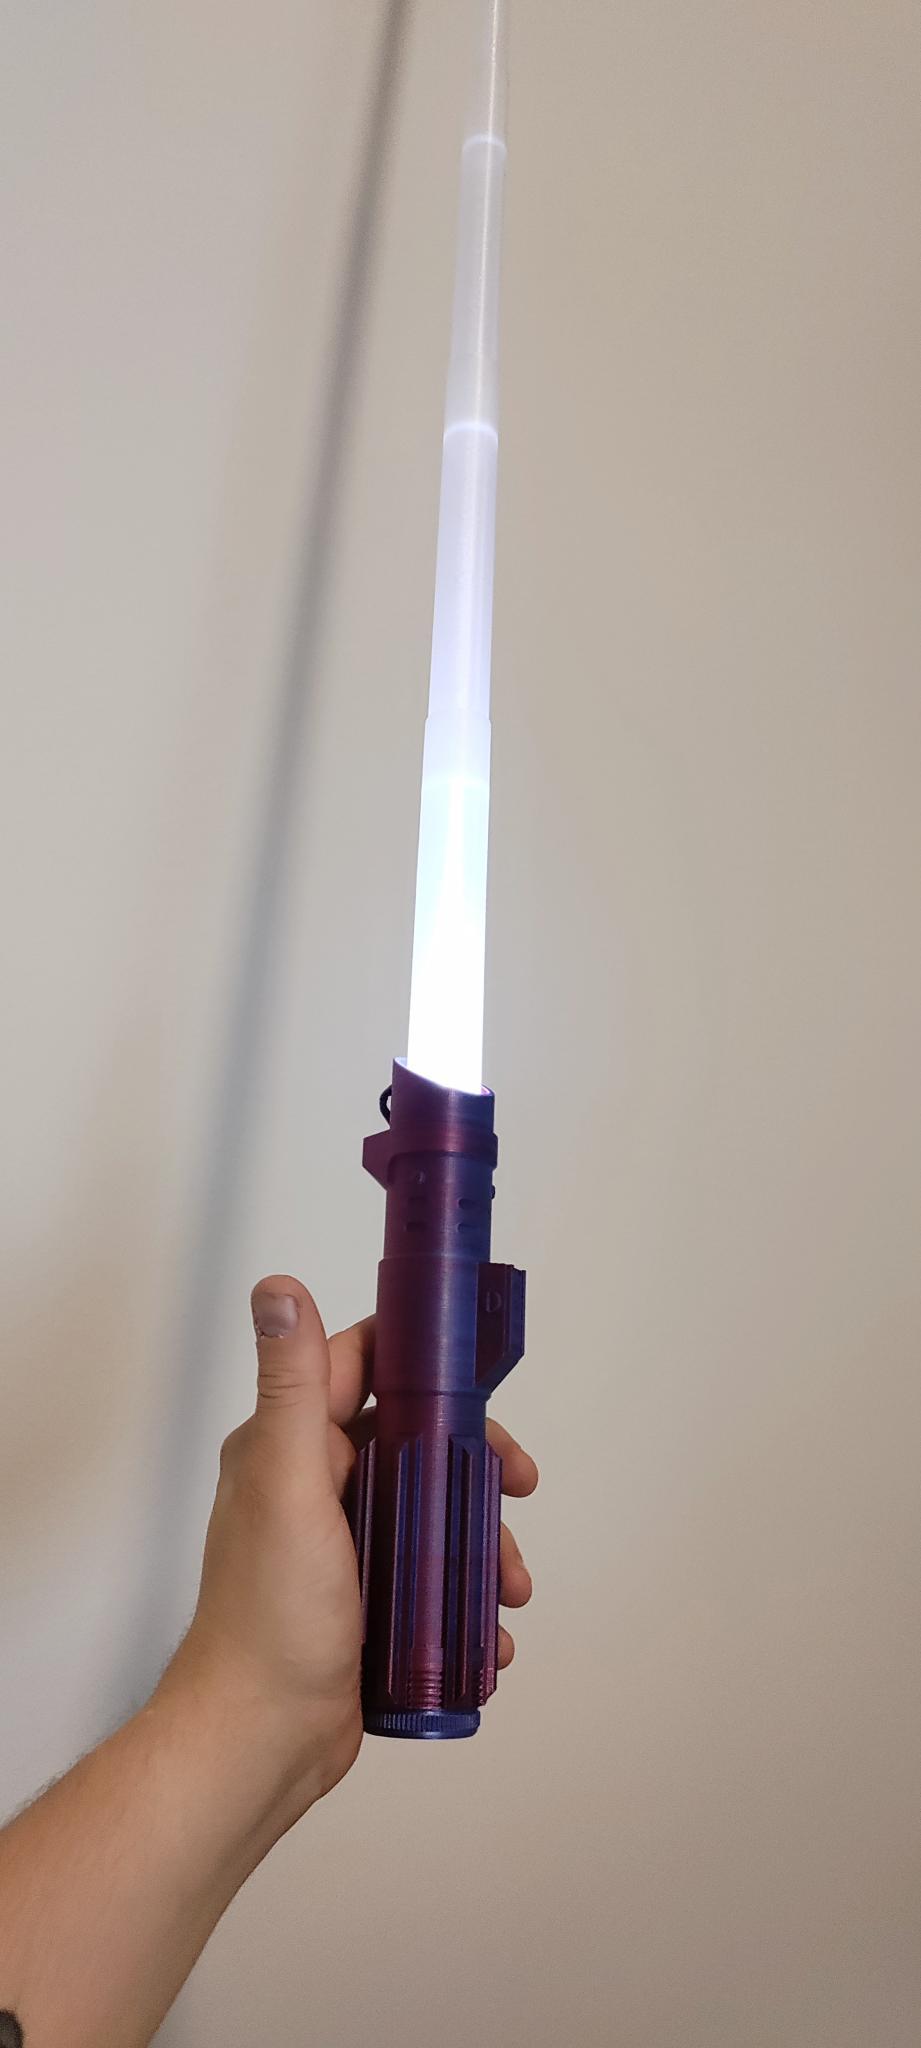 Collapsing Sith Lightsaber - Clear PLA + Dual color PLA and small flashlight. - 3d model